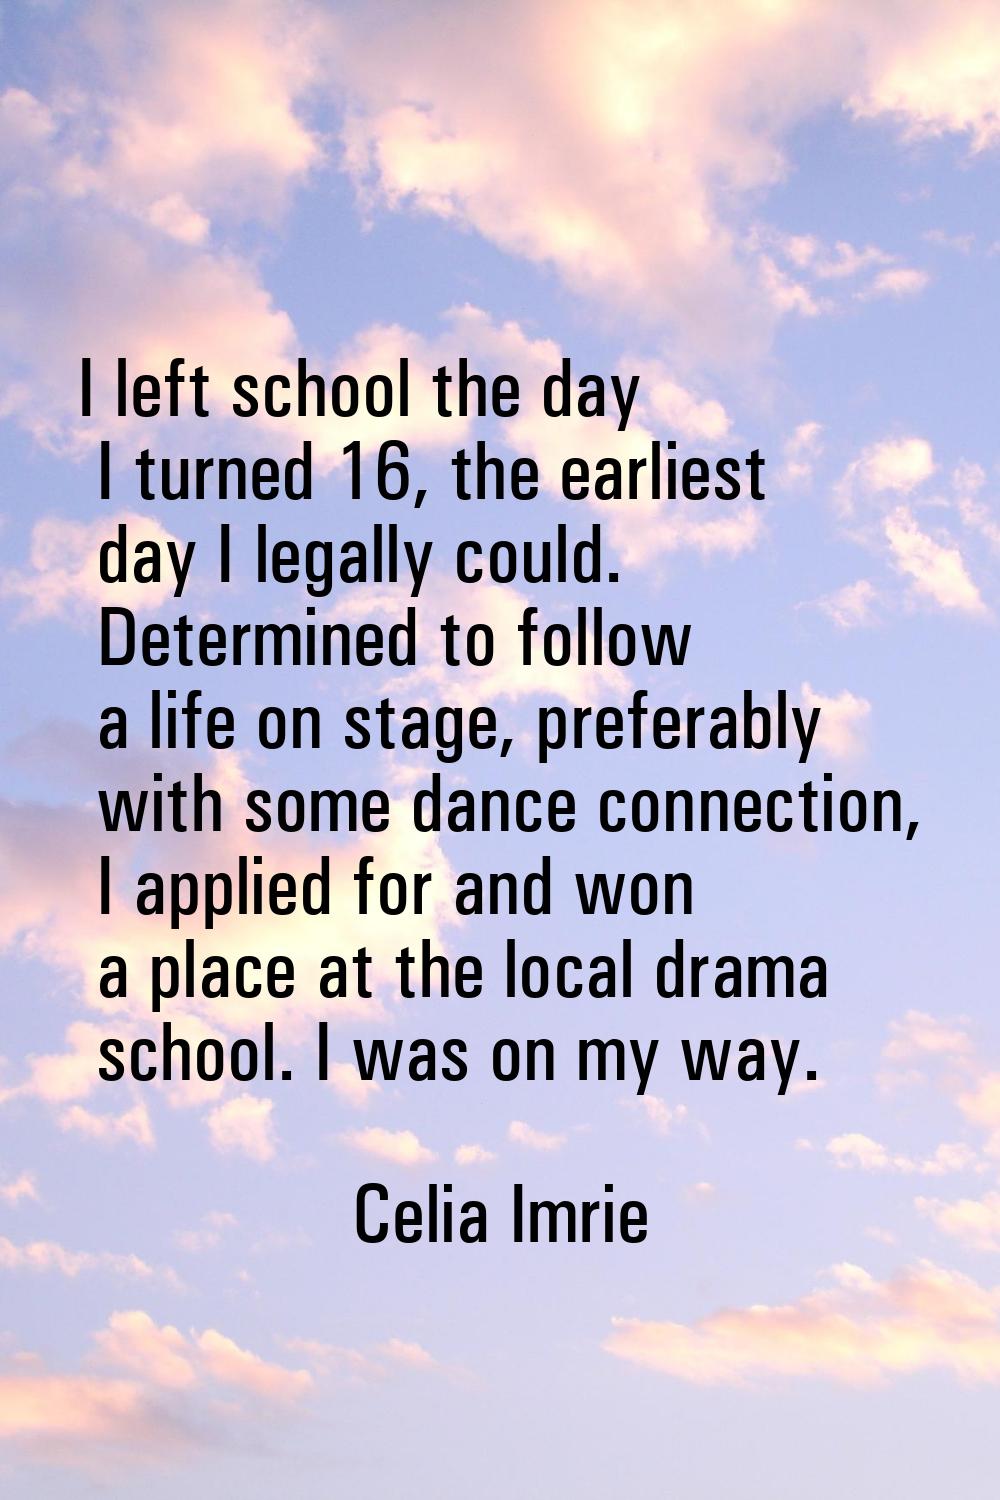 I left school the day I turned 16, the earliest day I legally could. Determined to follow a life on